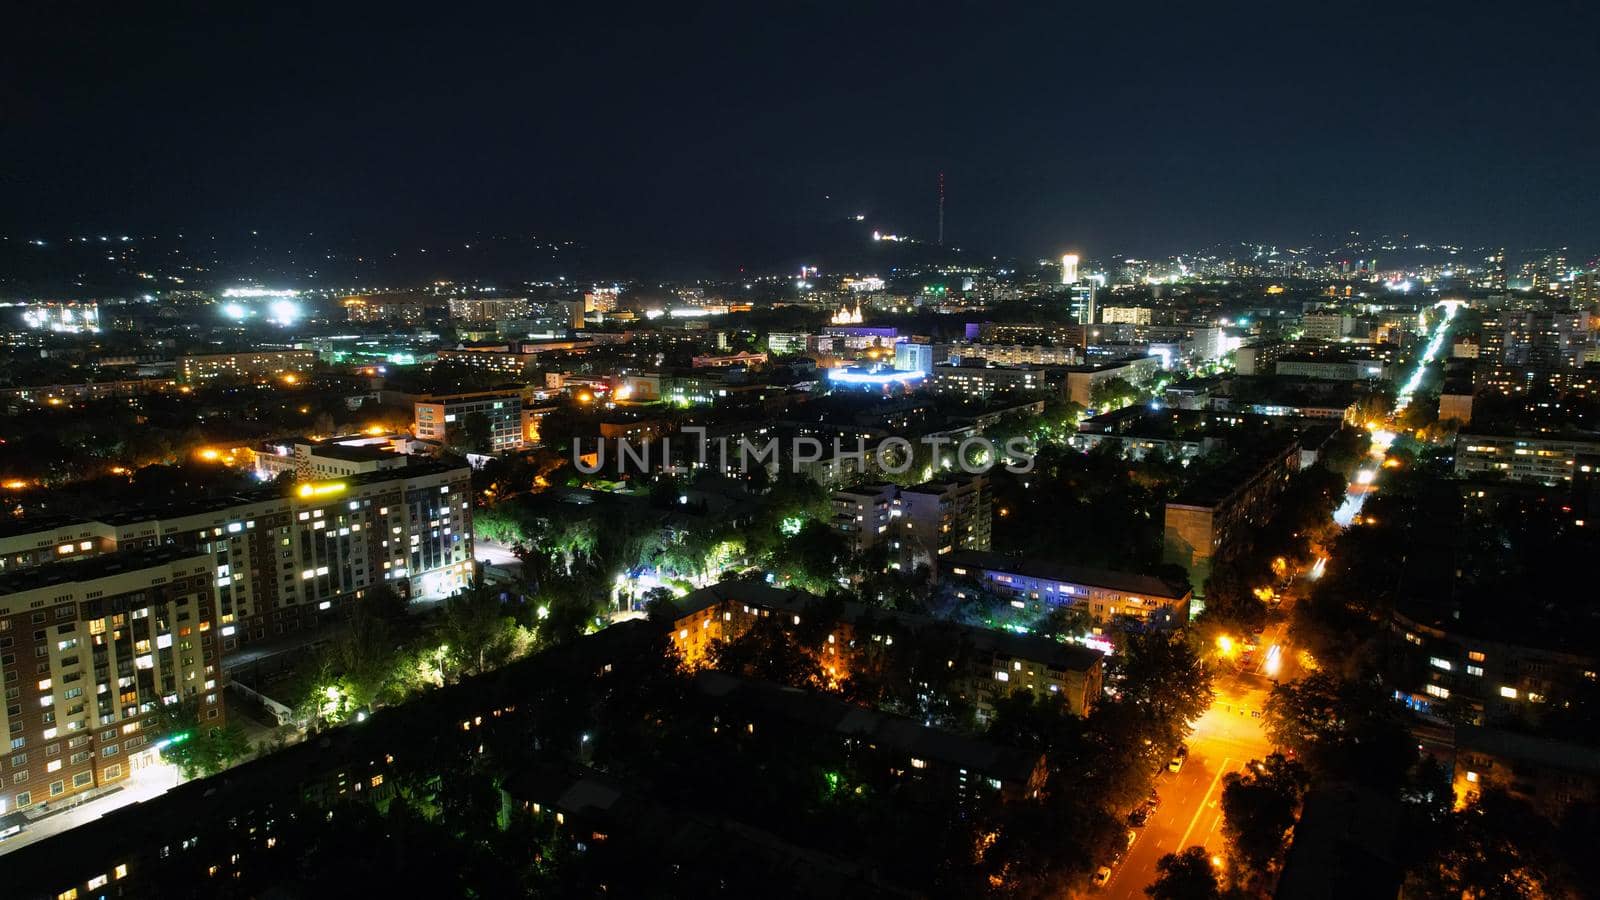 View from the height of the night city of Almaty by Passcal